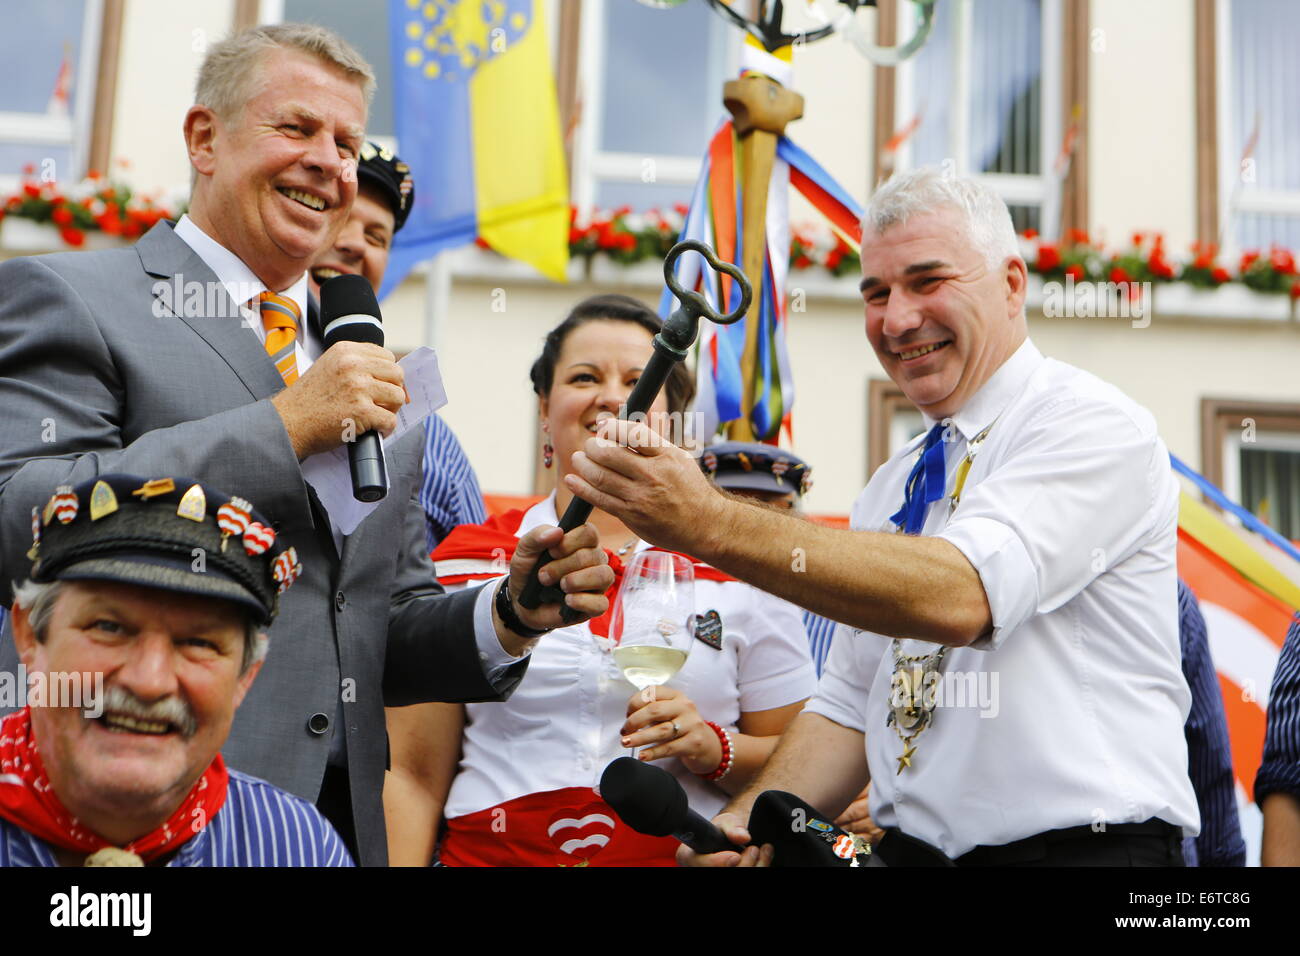 Worms, Germany. 30th August 2014. The Lord Mayor of Worms, Michael Kissel (SPD), hands over the key to the city to the BojemŠŠschter vun de FischerwŠŠd (mayor of the fishermen's lea), Markus Trapp, who keeps it until the end of the festival. The largest wine fair along the Rhine, the Backfischfest, started in Worms with the traditional handing over of power from the Lord Mayor to the mayor of the fishermenÕs lea. The ceremony included dances and music. Stock Photo